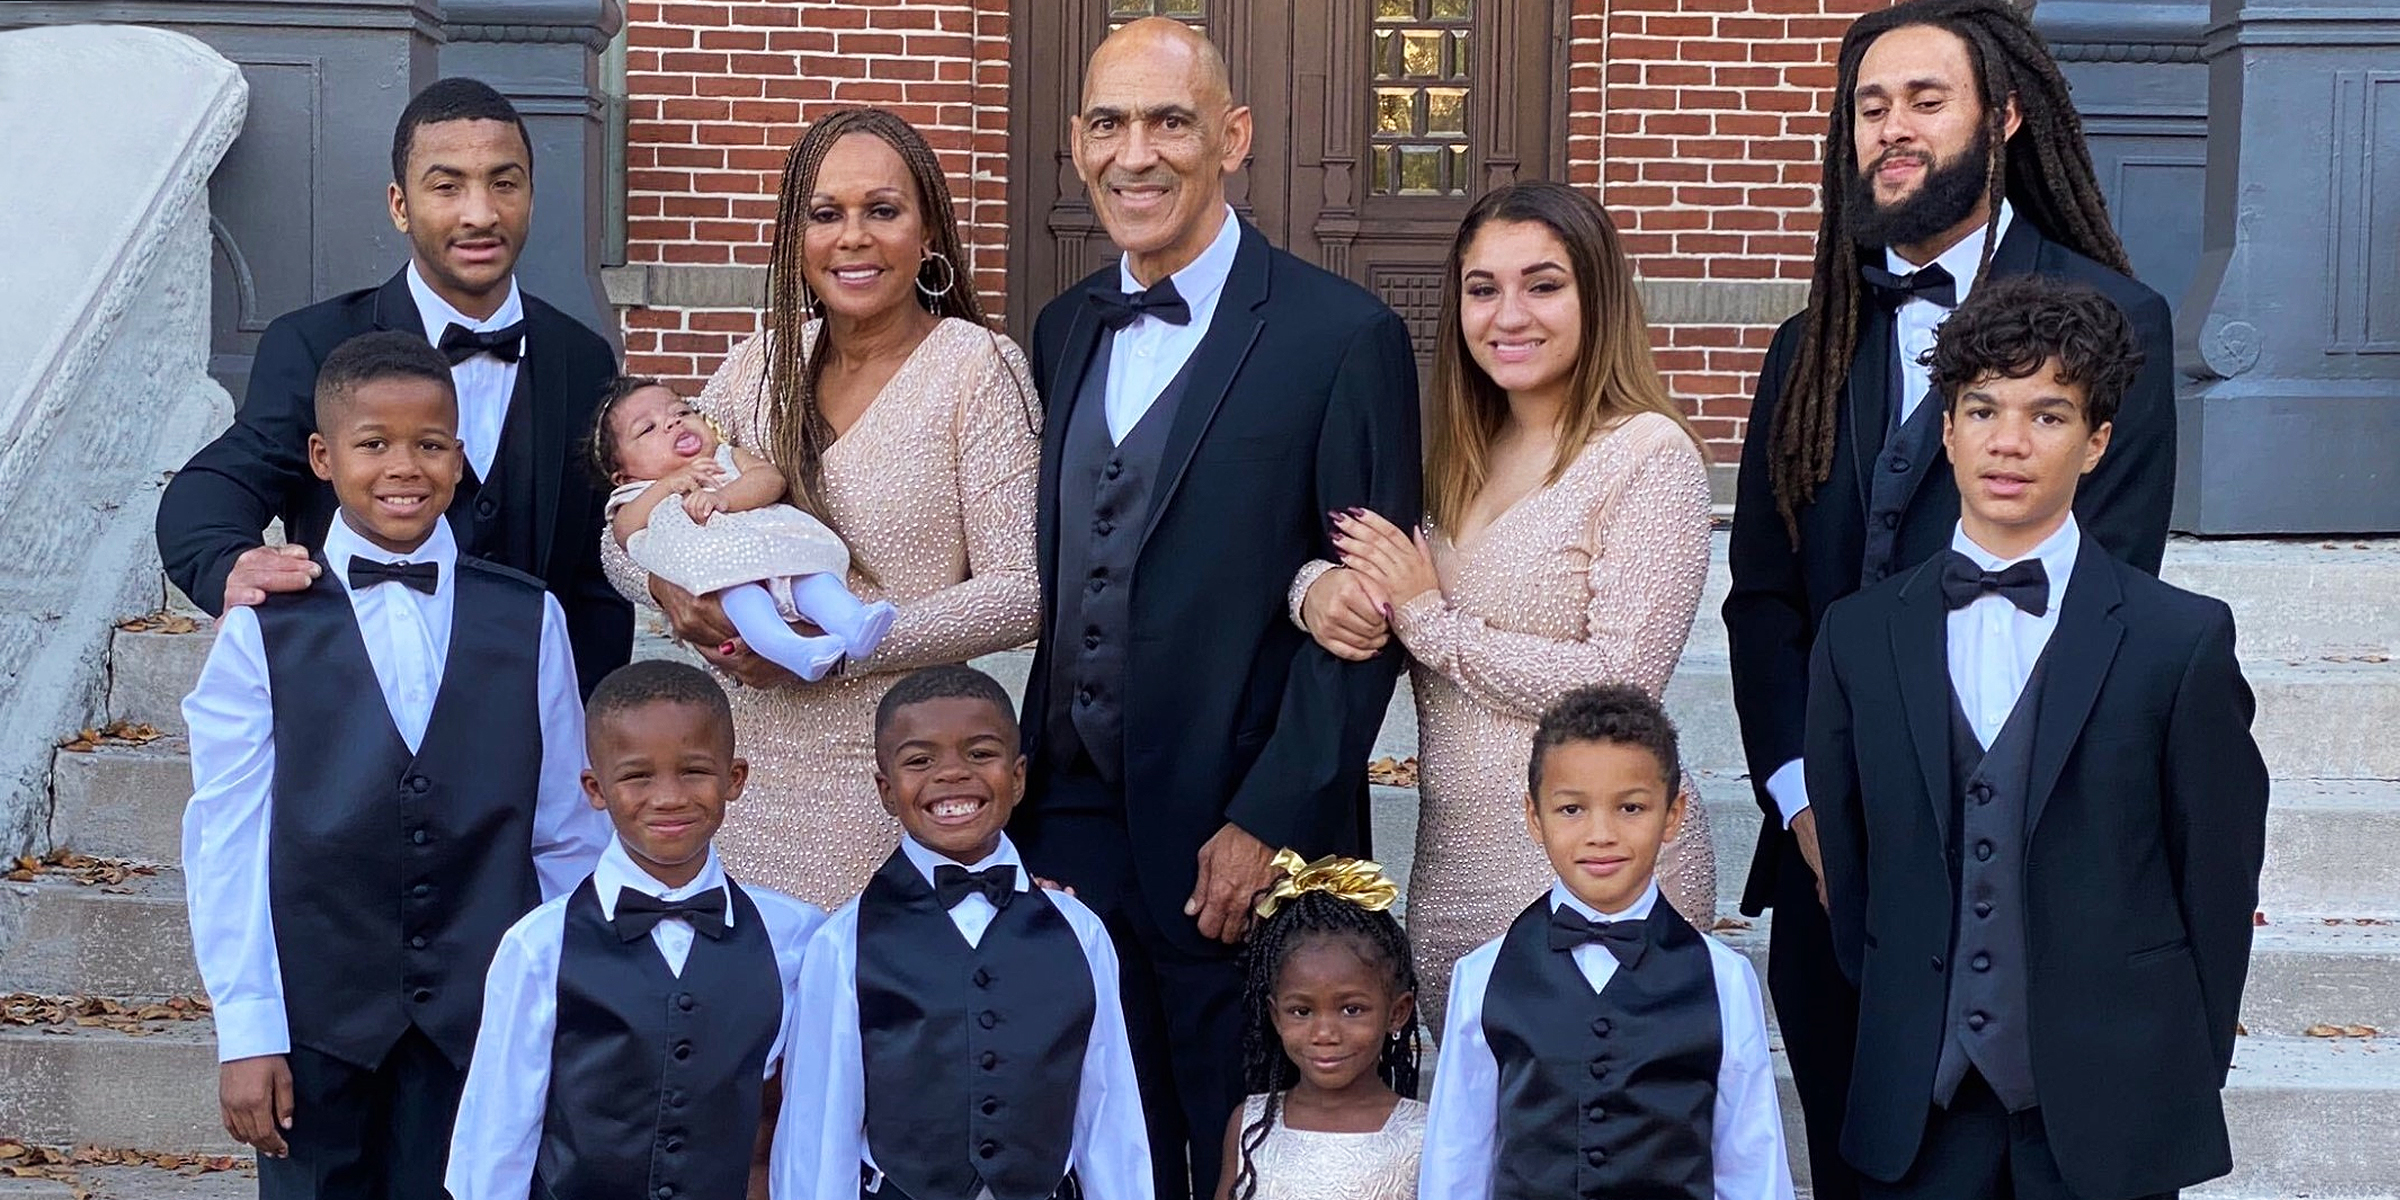 Tony Dungy and his family. | Source: Facebook.com/TonyDungy